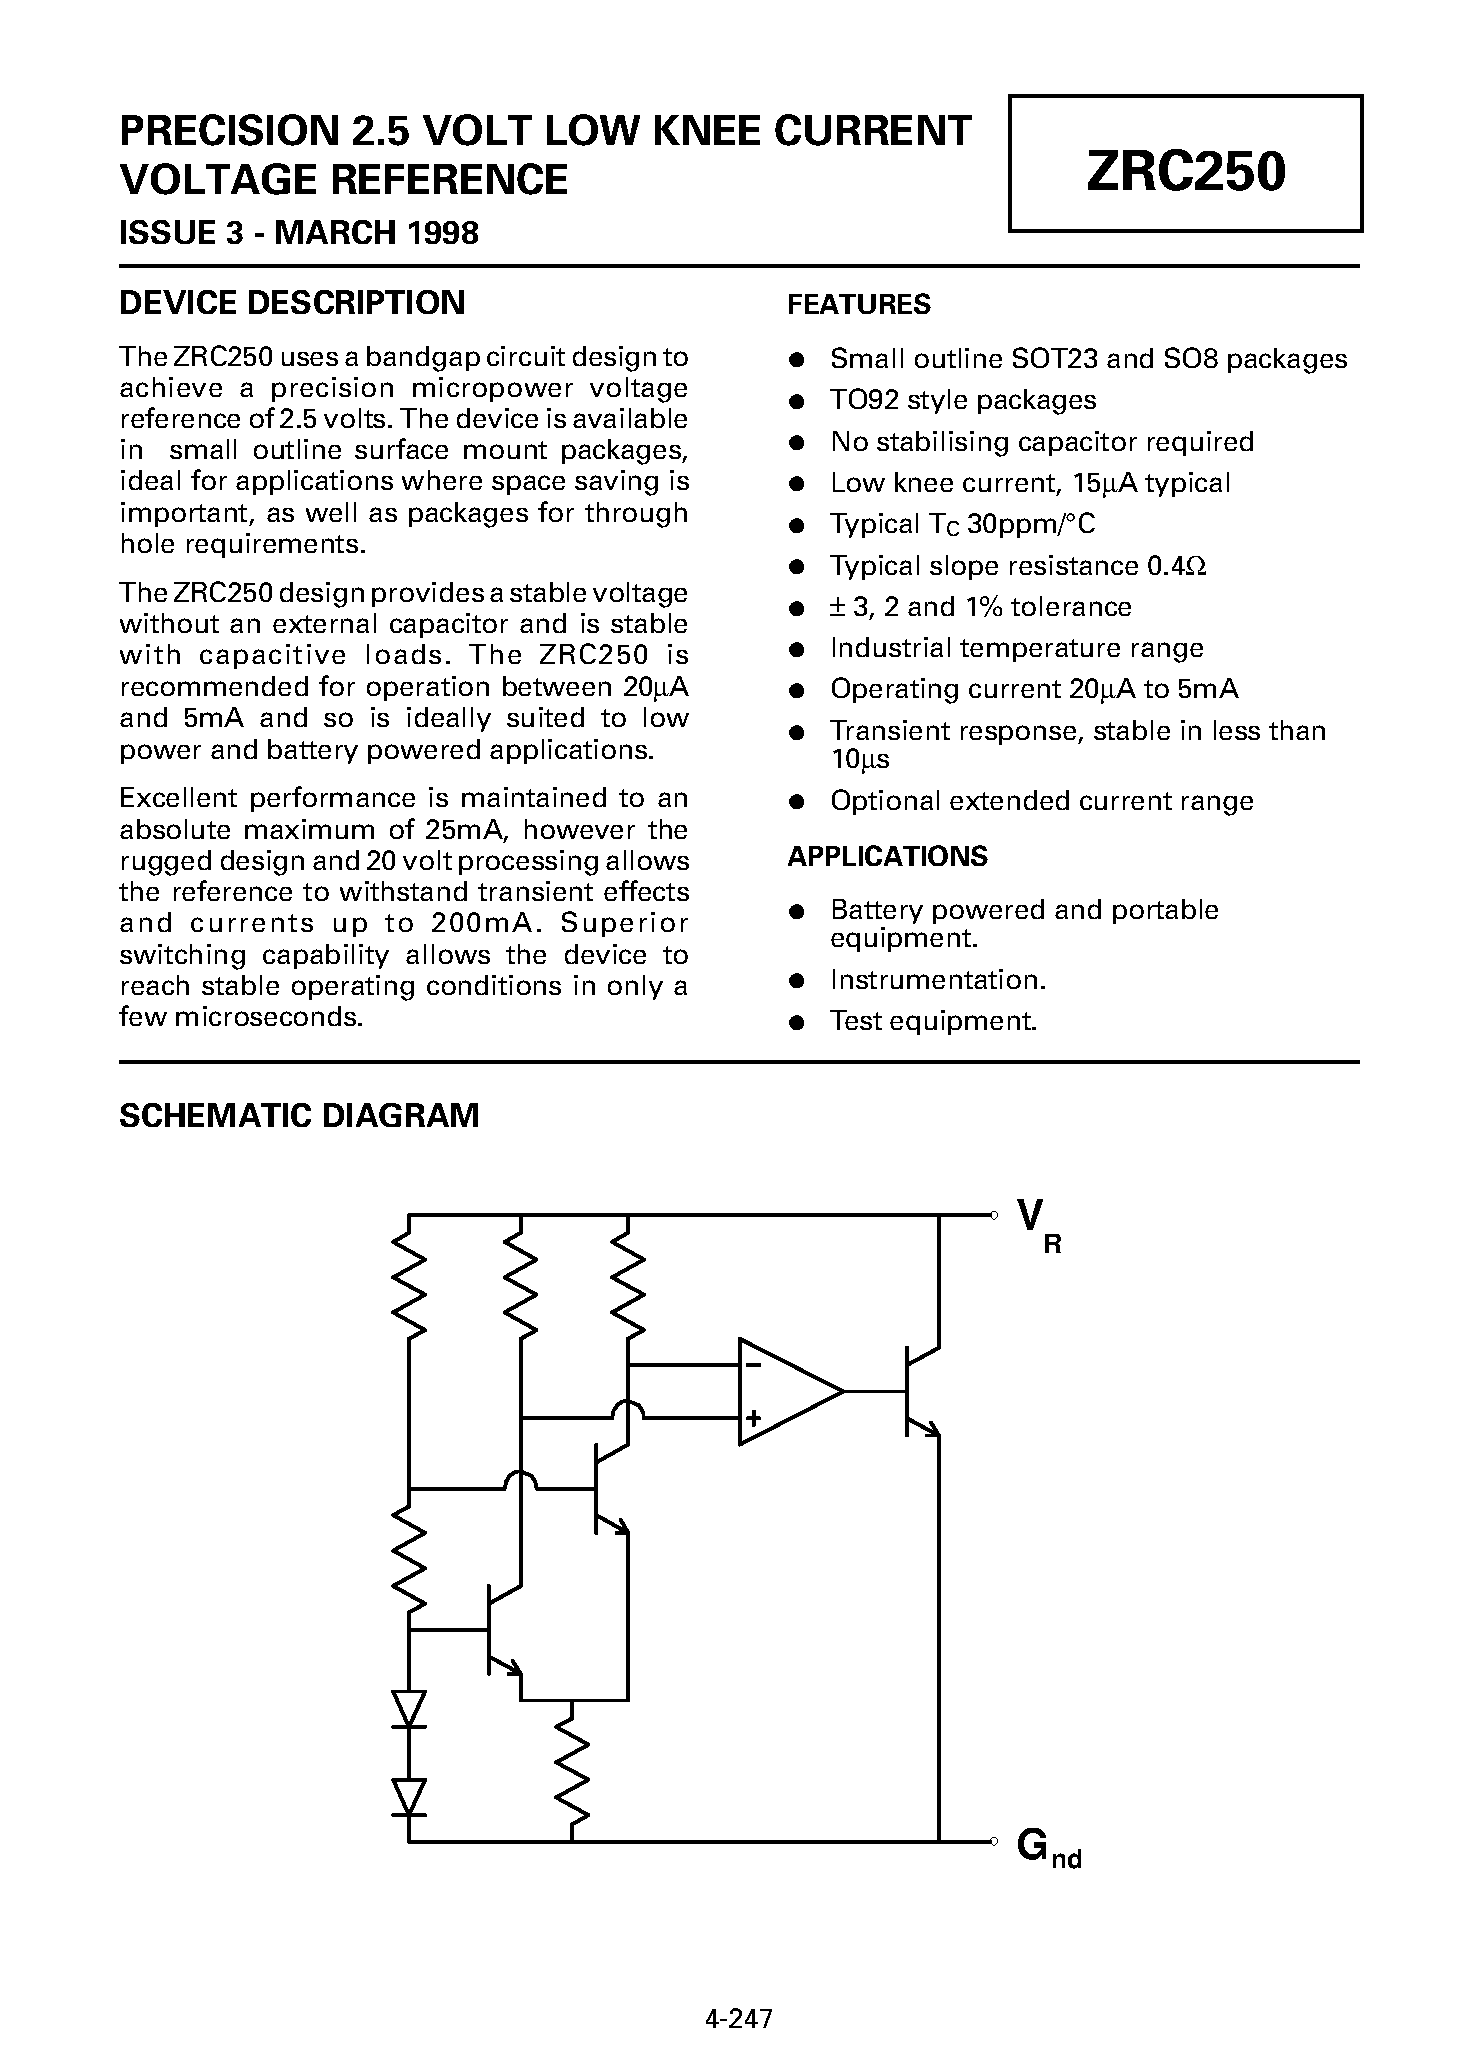 Datasheet ZRC250Y01 - PRECISION 2.5 VOLT LOW KNEE CURRENT VOLTAGE REFERENCE page 1